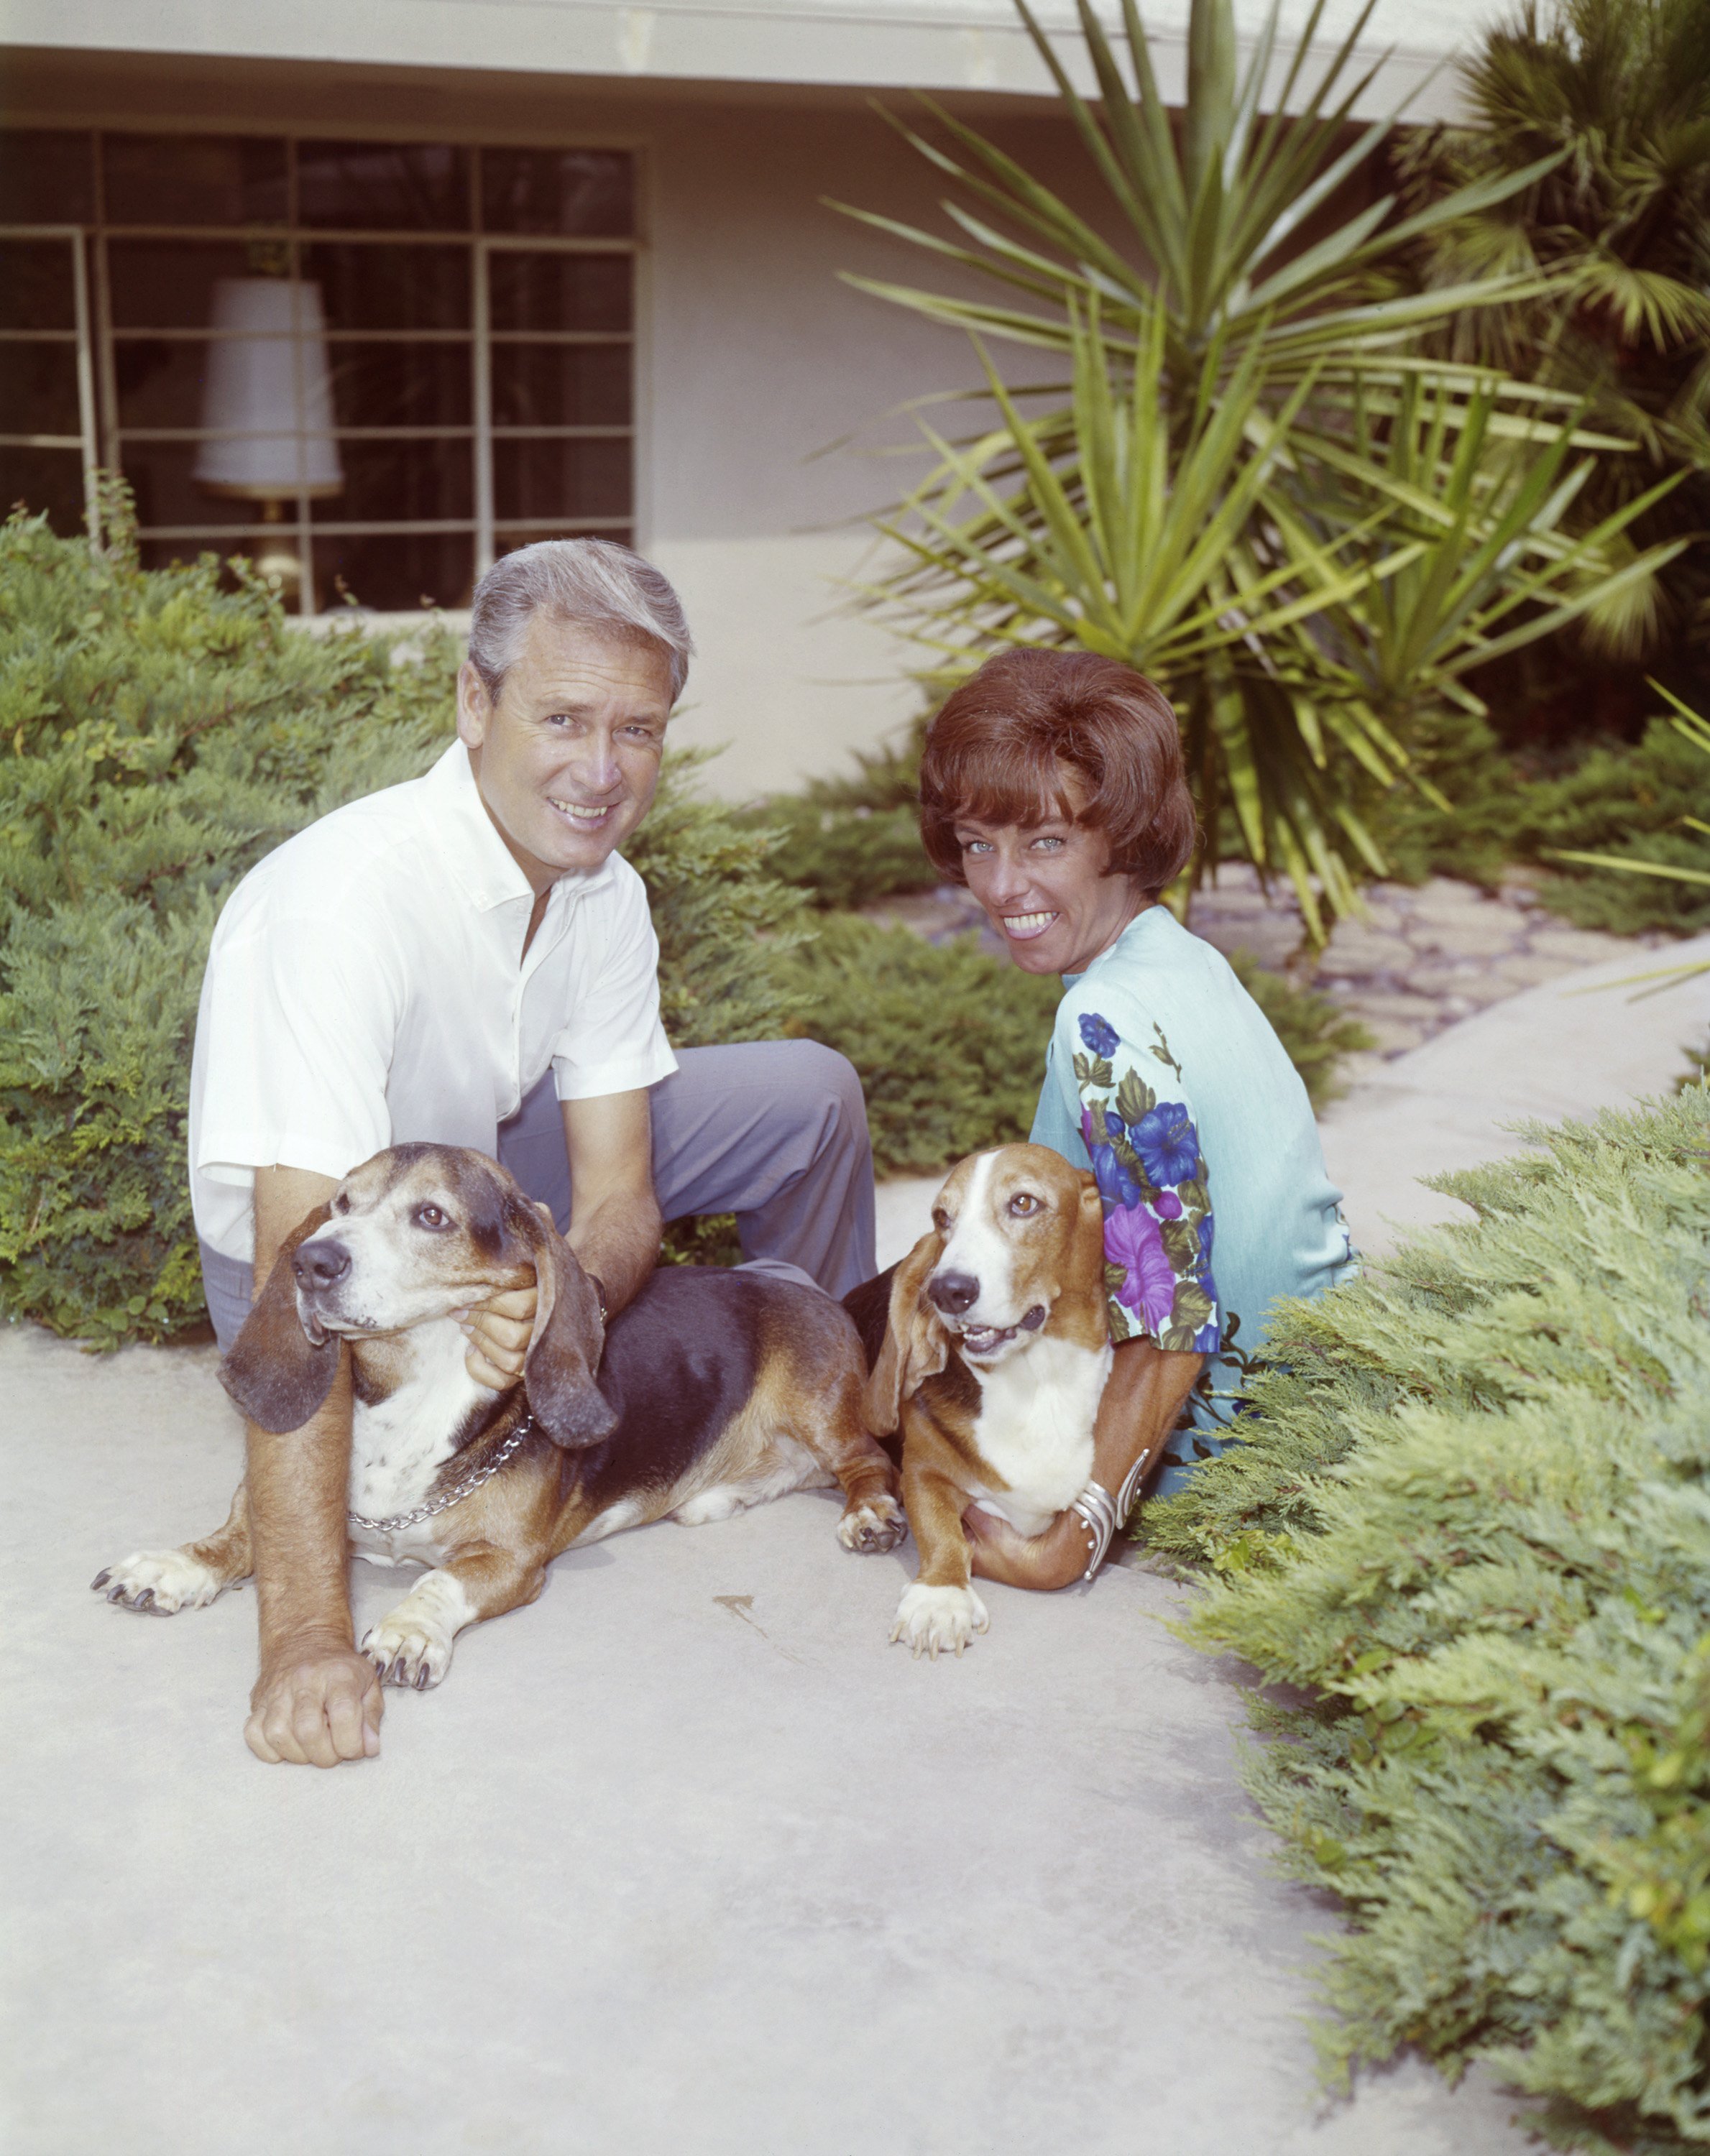 Bob Barker and his wife Dorothy Jo Barker were smiling while taking a picture with their dogs. | Source: Getty Images